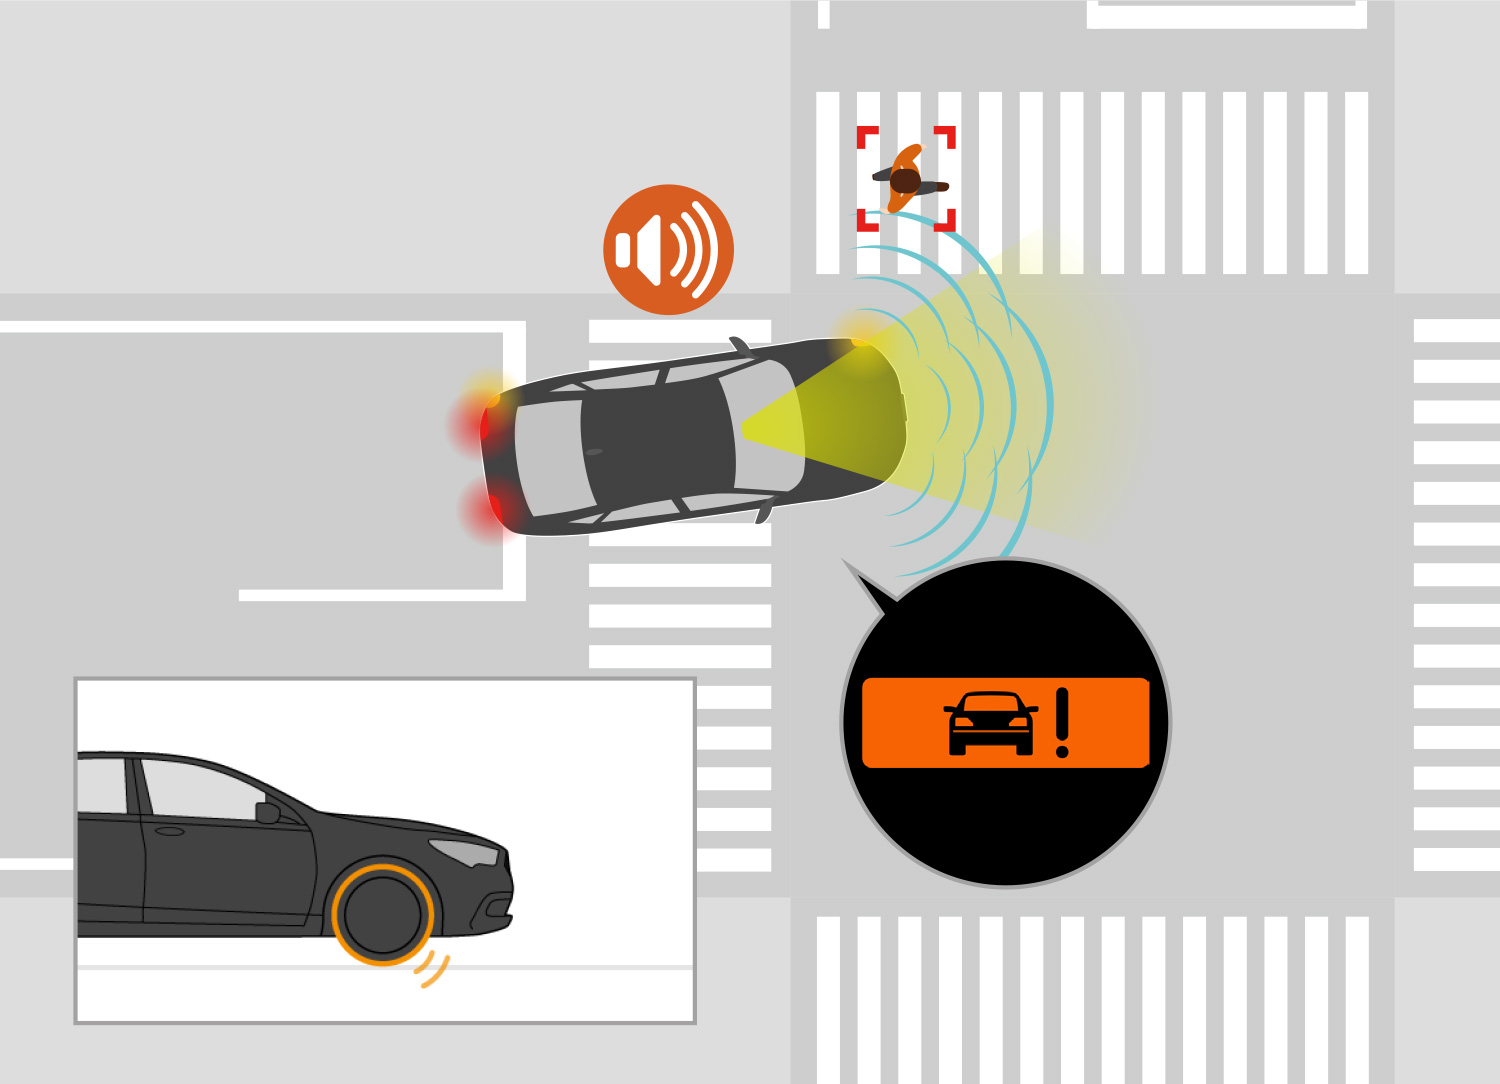 When the vehicle come closer, in addition to audible and visible warnings, the system applies light braking to alert the driver.